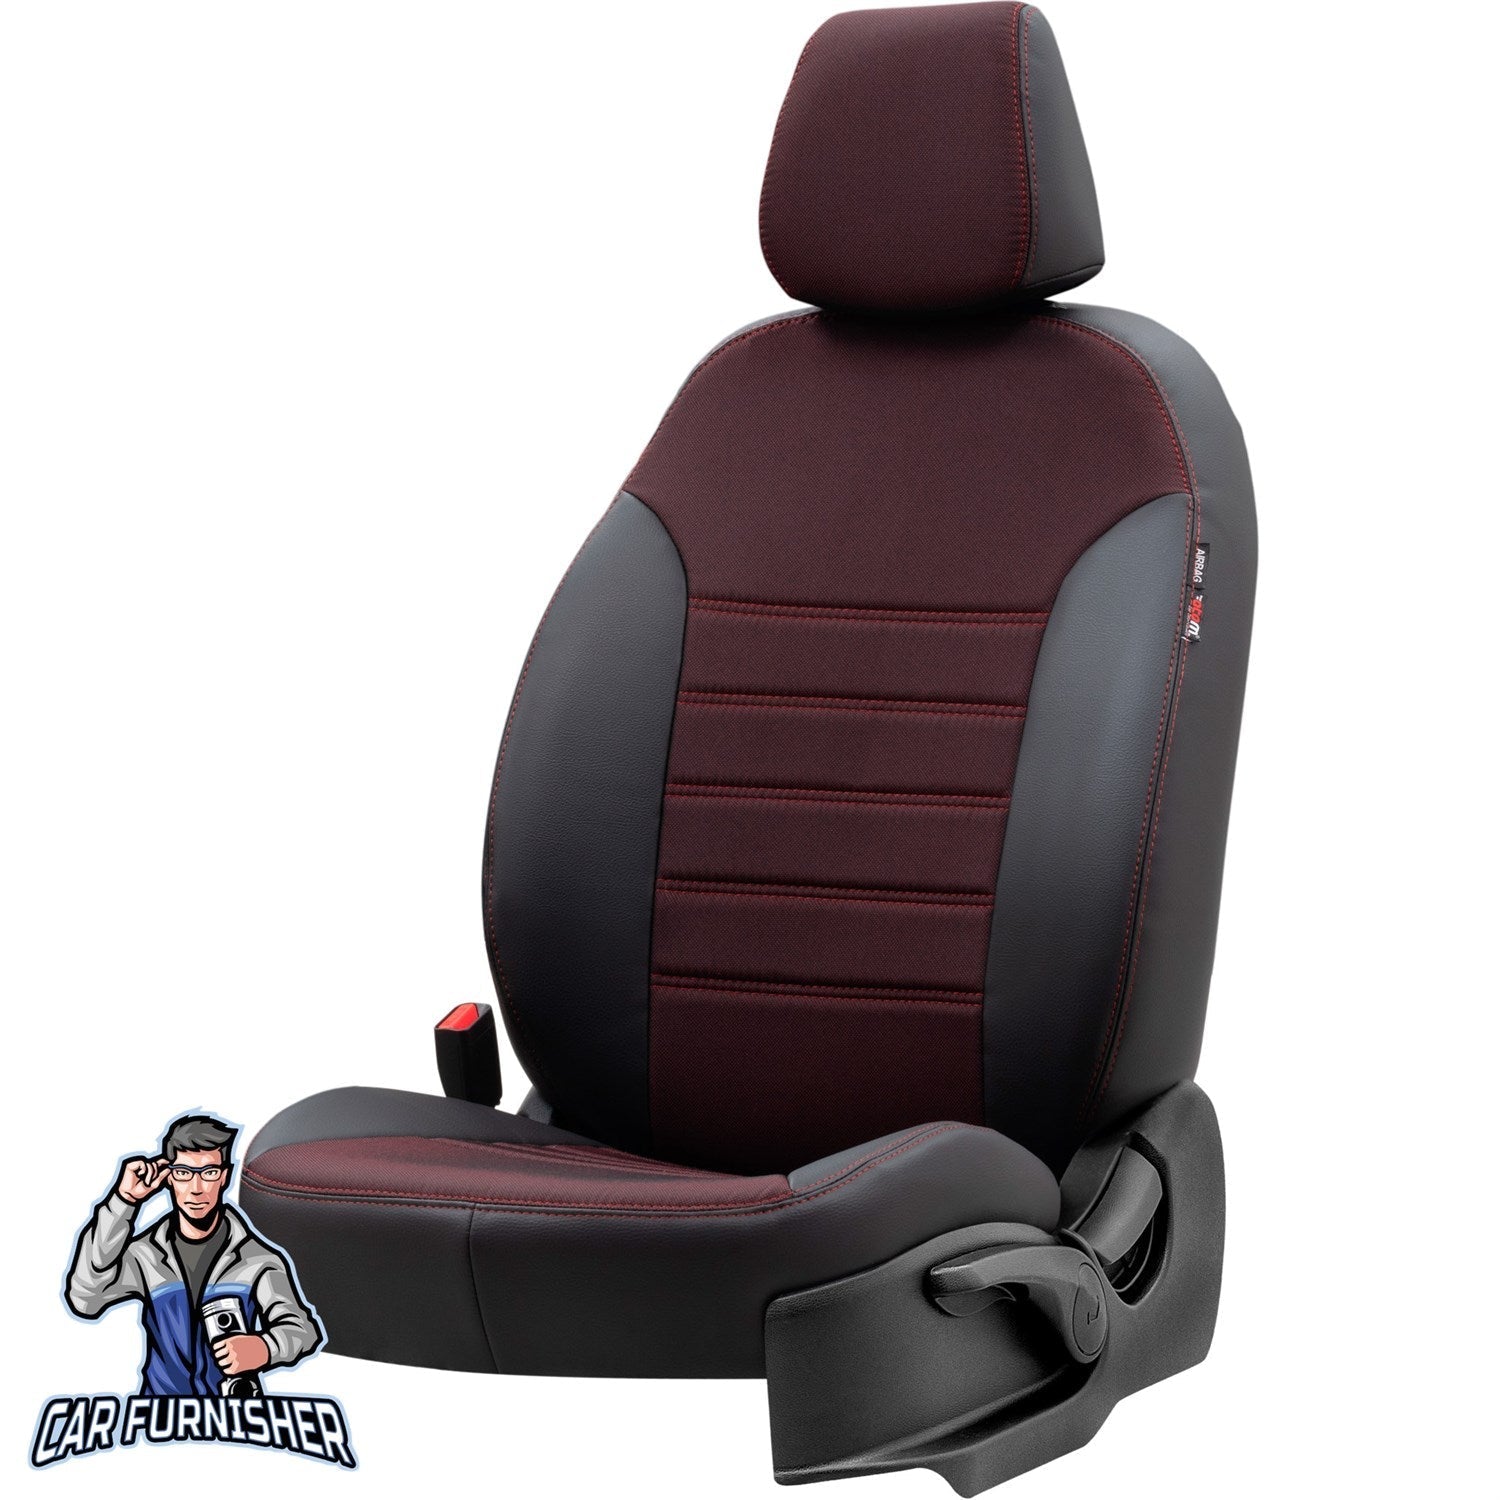 Volkswagen Caravelle Seat Cover Paris Leather & Jacquard Design Red Leather & Jacquard Fabric